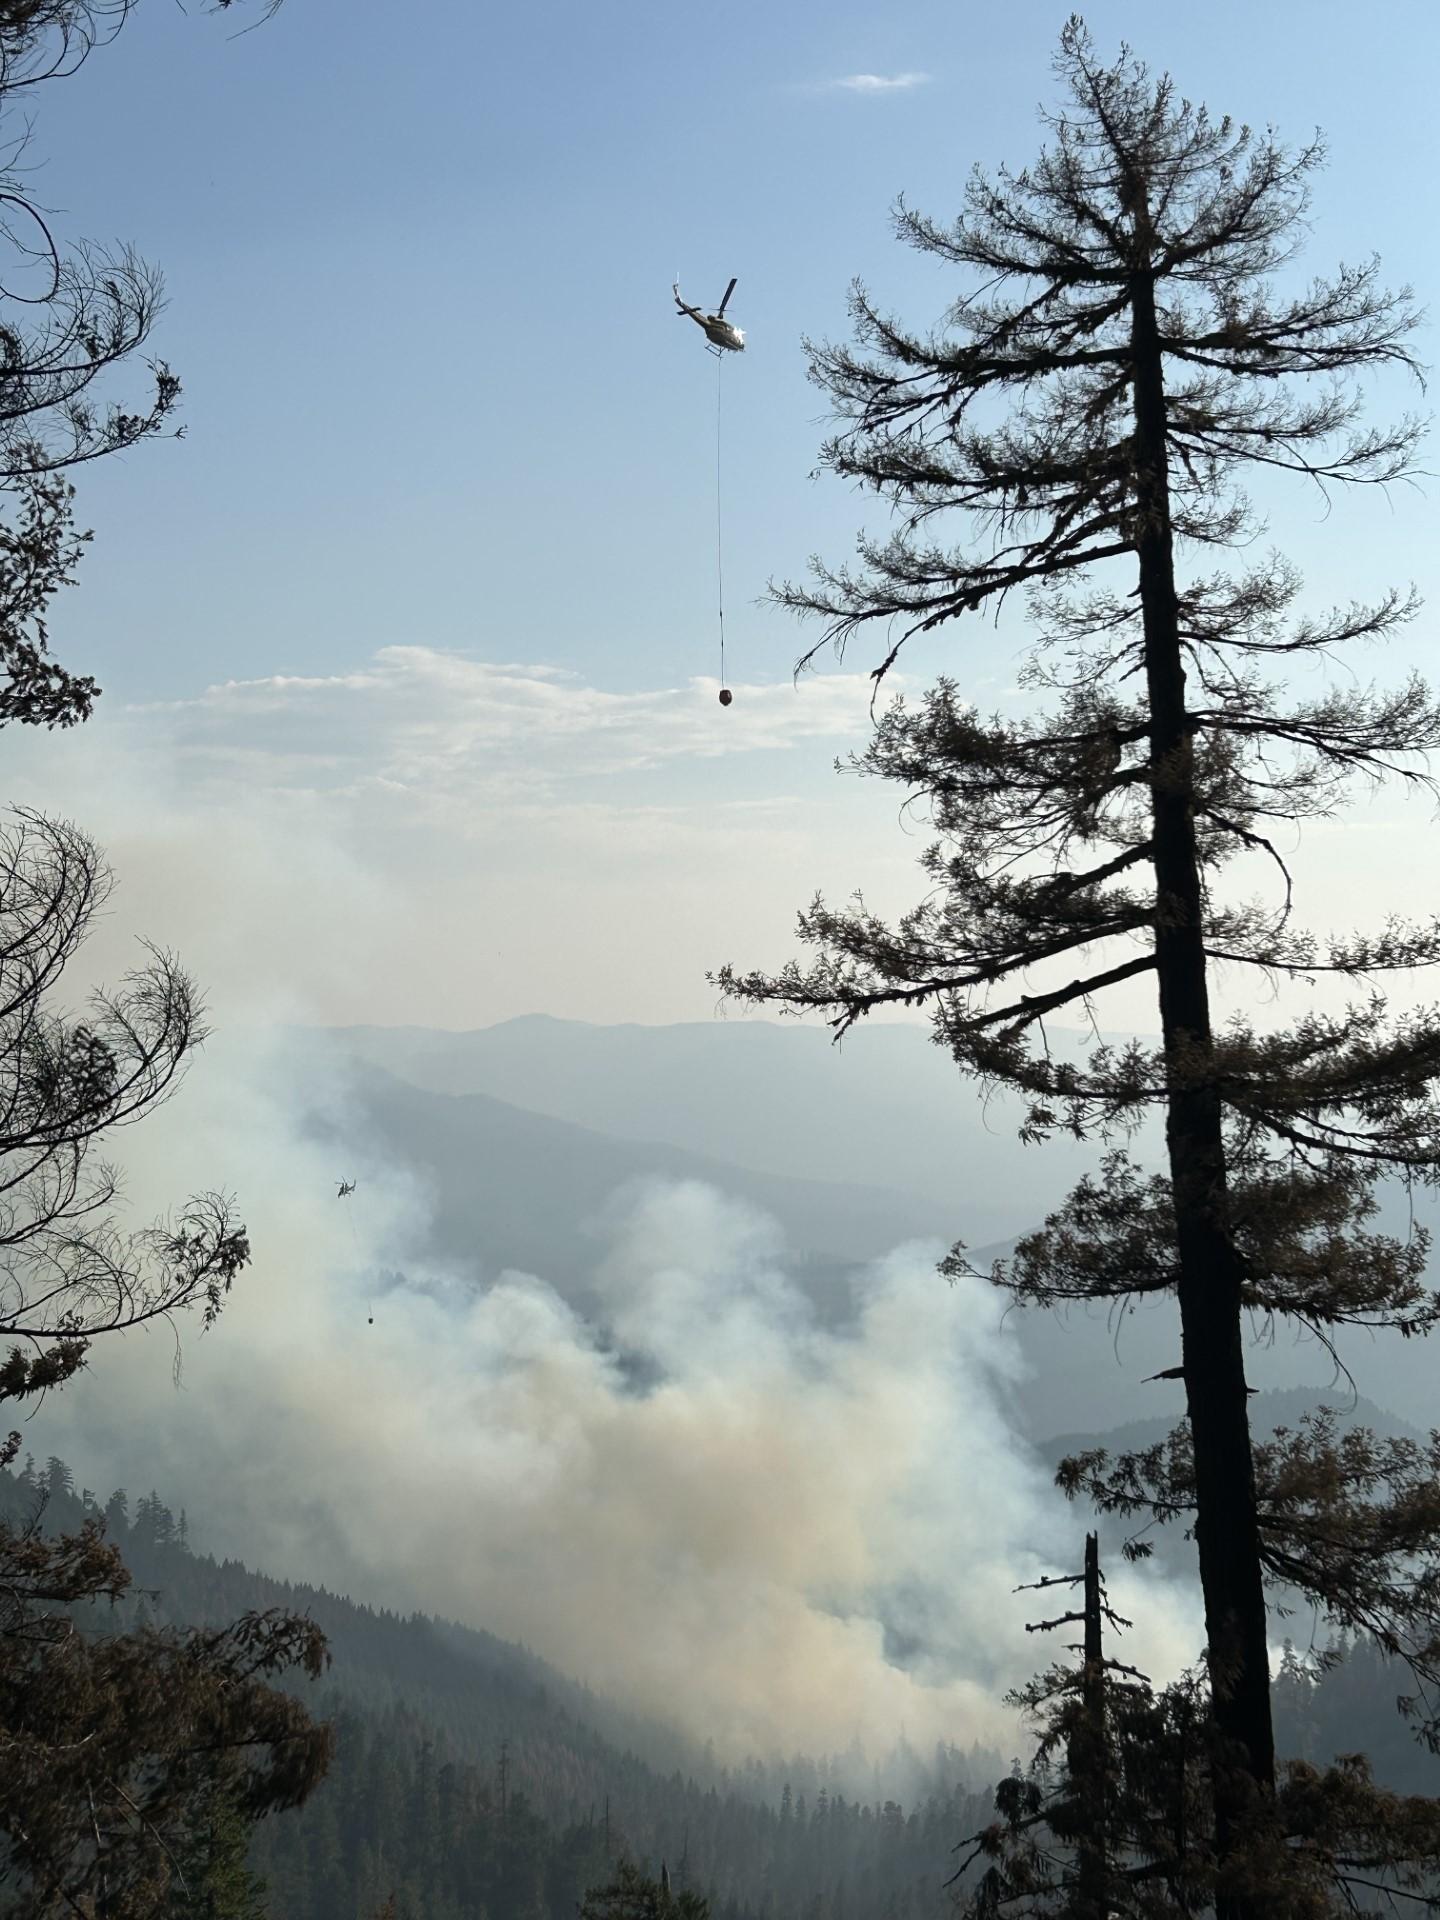 A helicopter performs bucket work over a smoky area